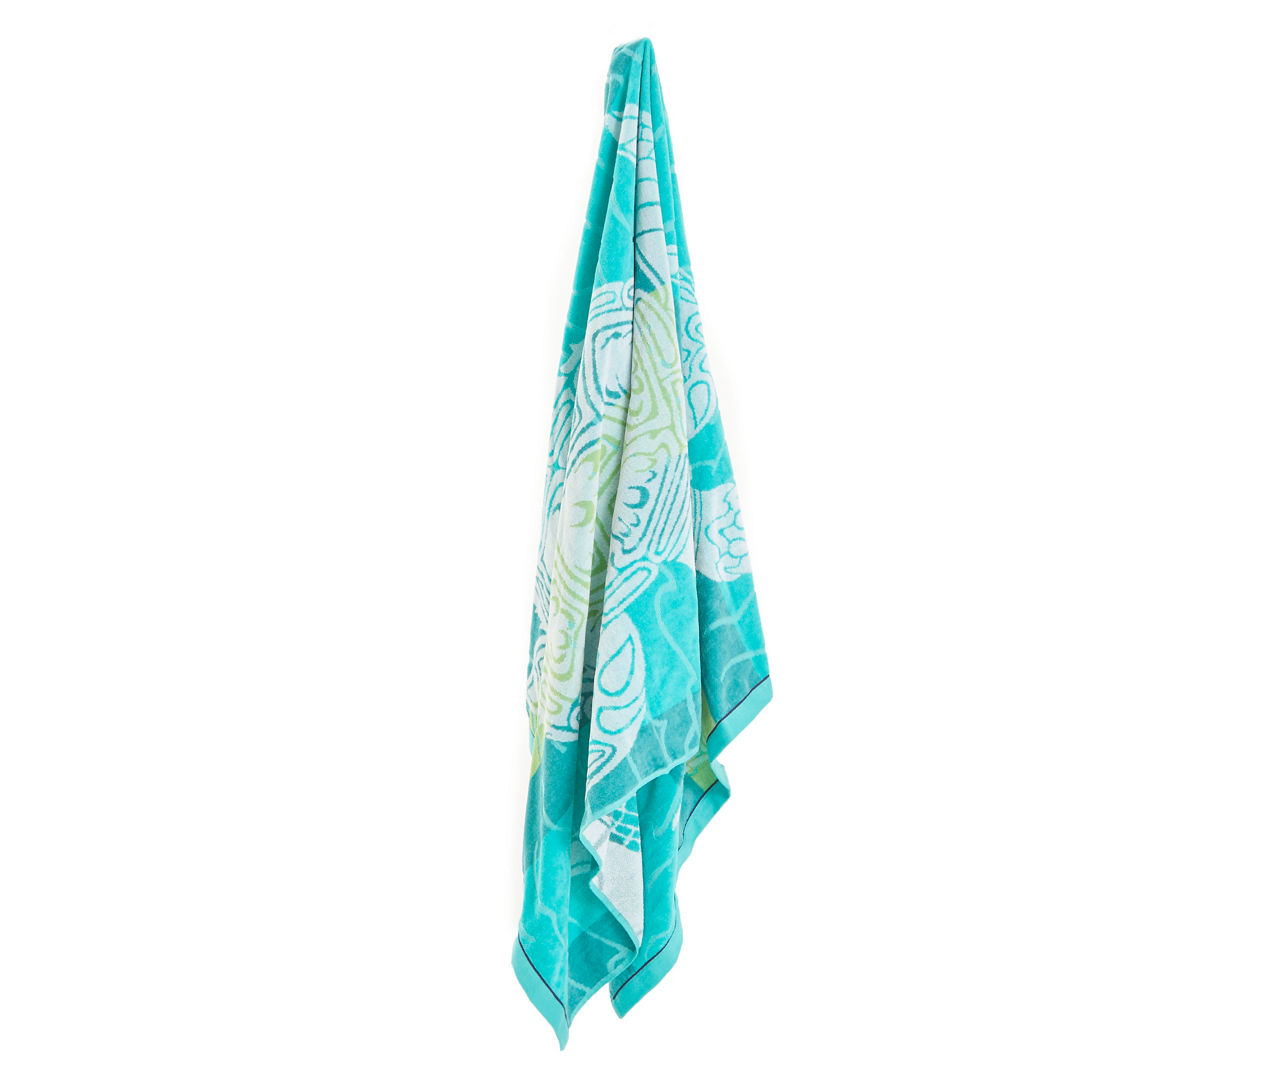 Nova Blue Turtle Beach Towel Tropical Blue Colors with A Unique Design,  Extra Large, XL (34x 63) Made from 100% Cotton for Kids & Adults